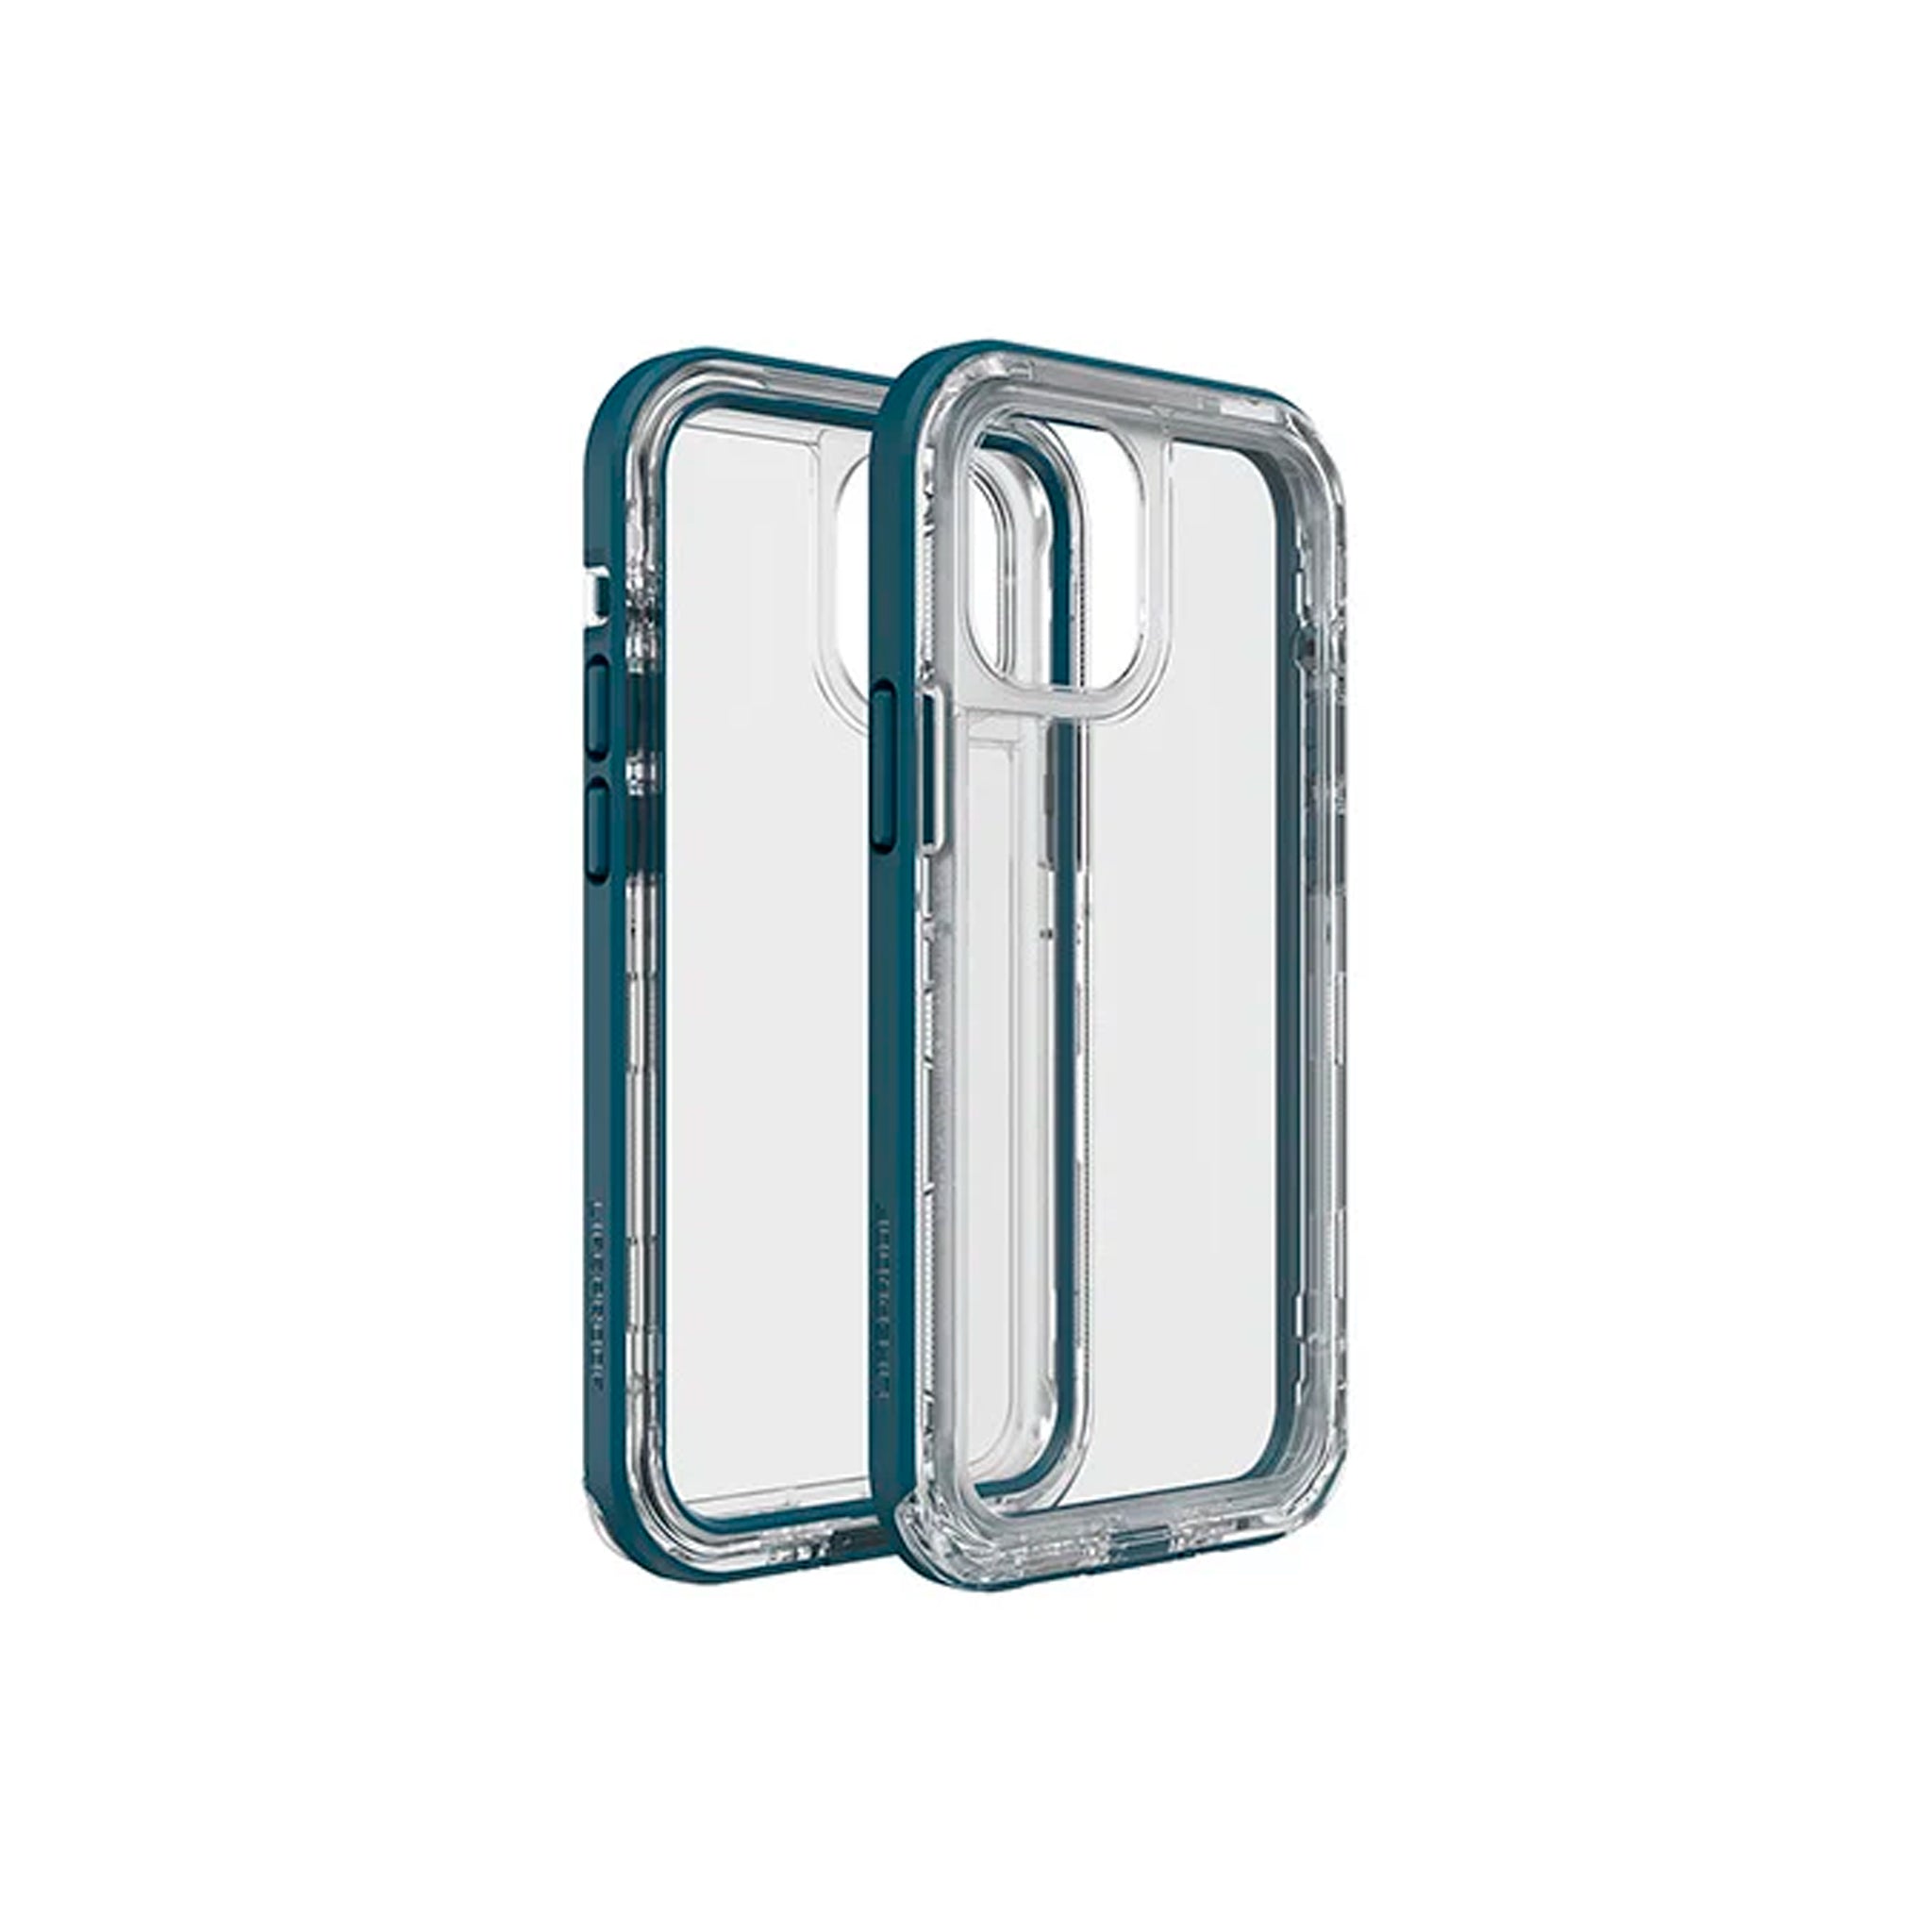 LifeProof - Next for iPhone 12 mini - Clear Lake